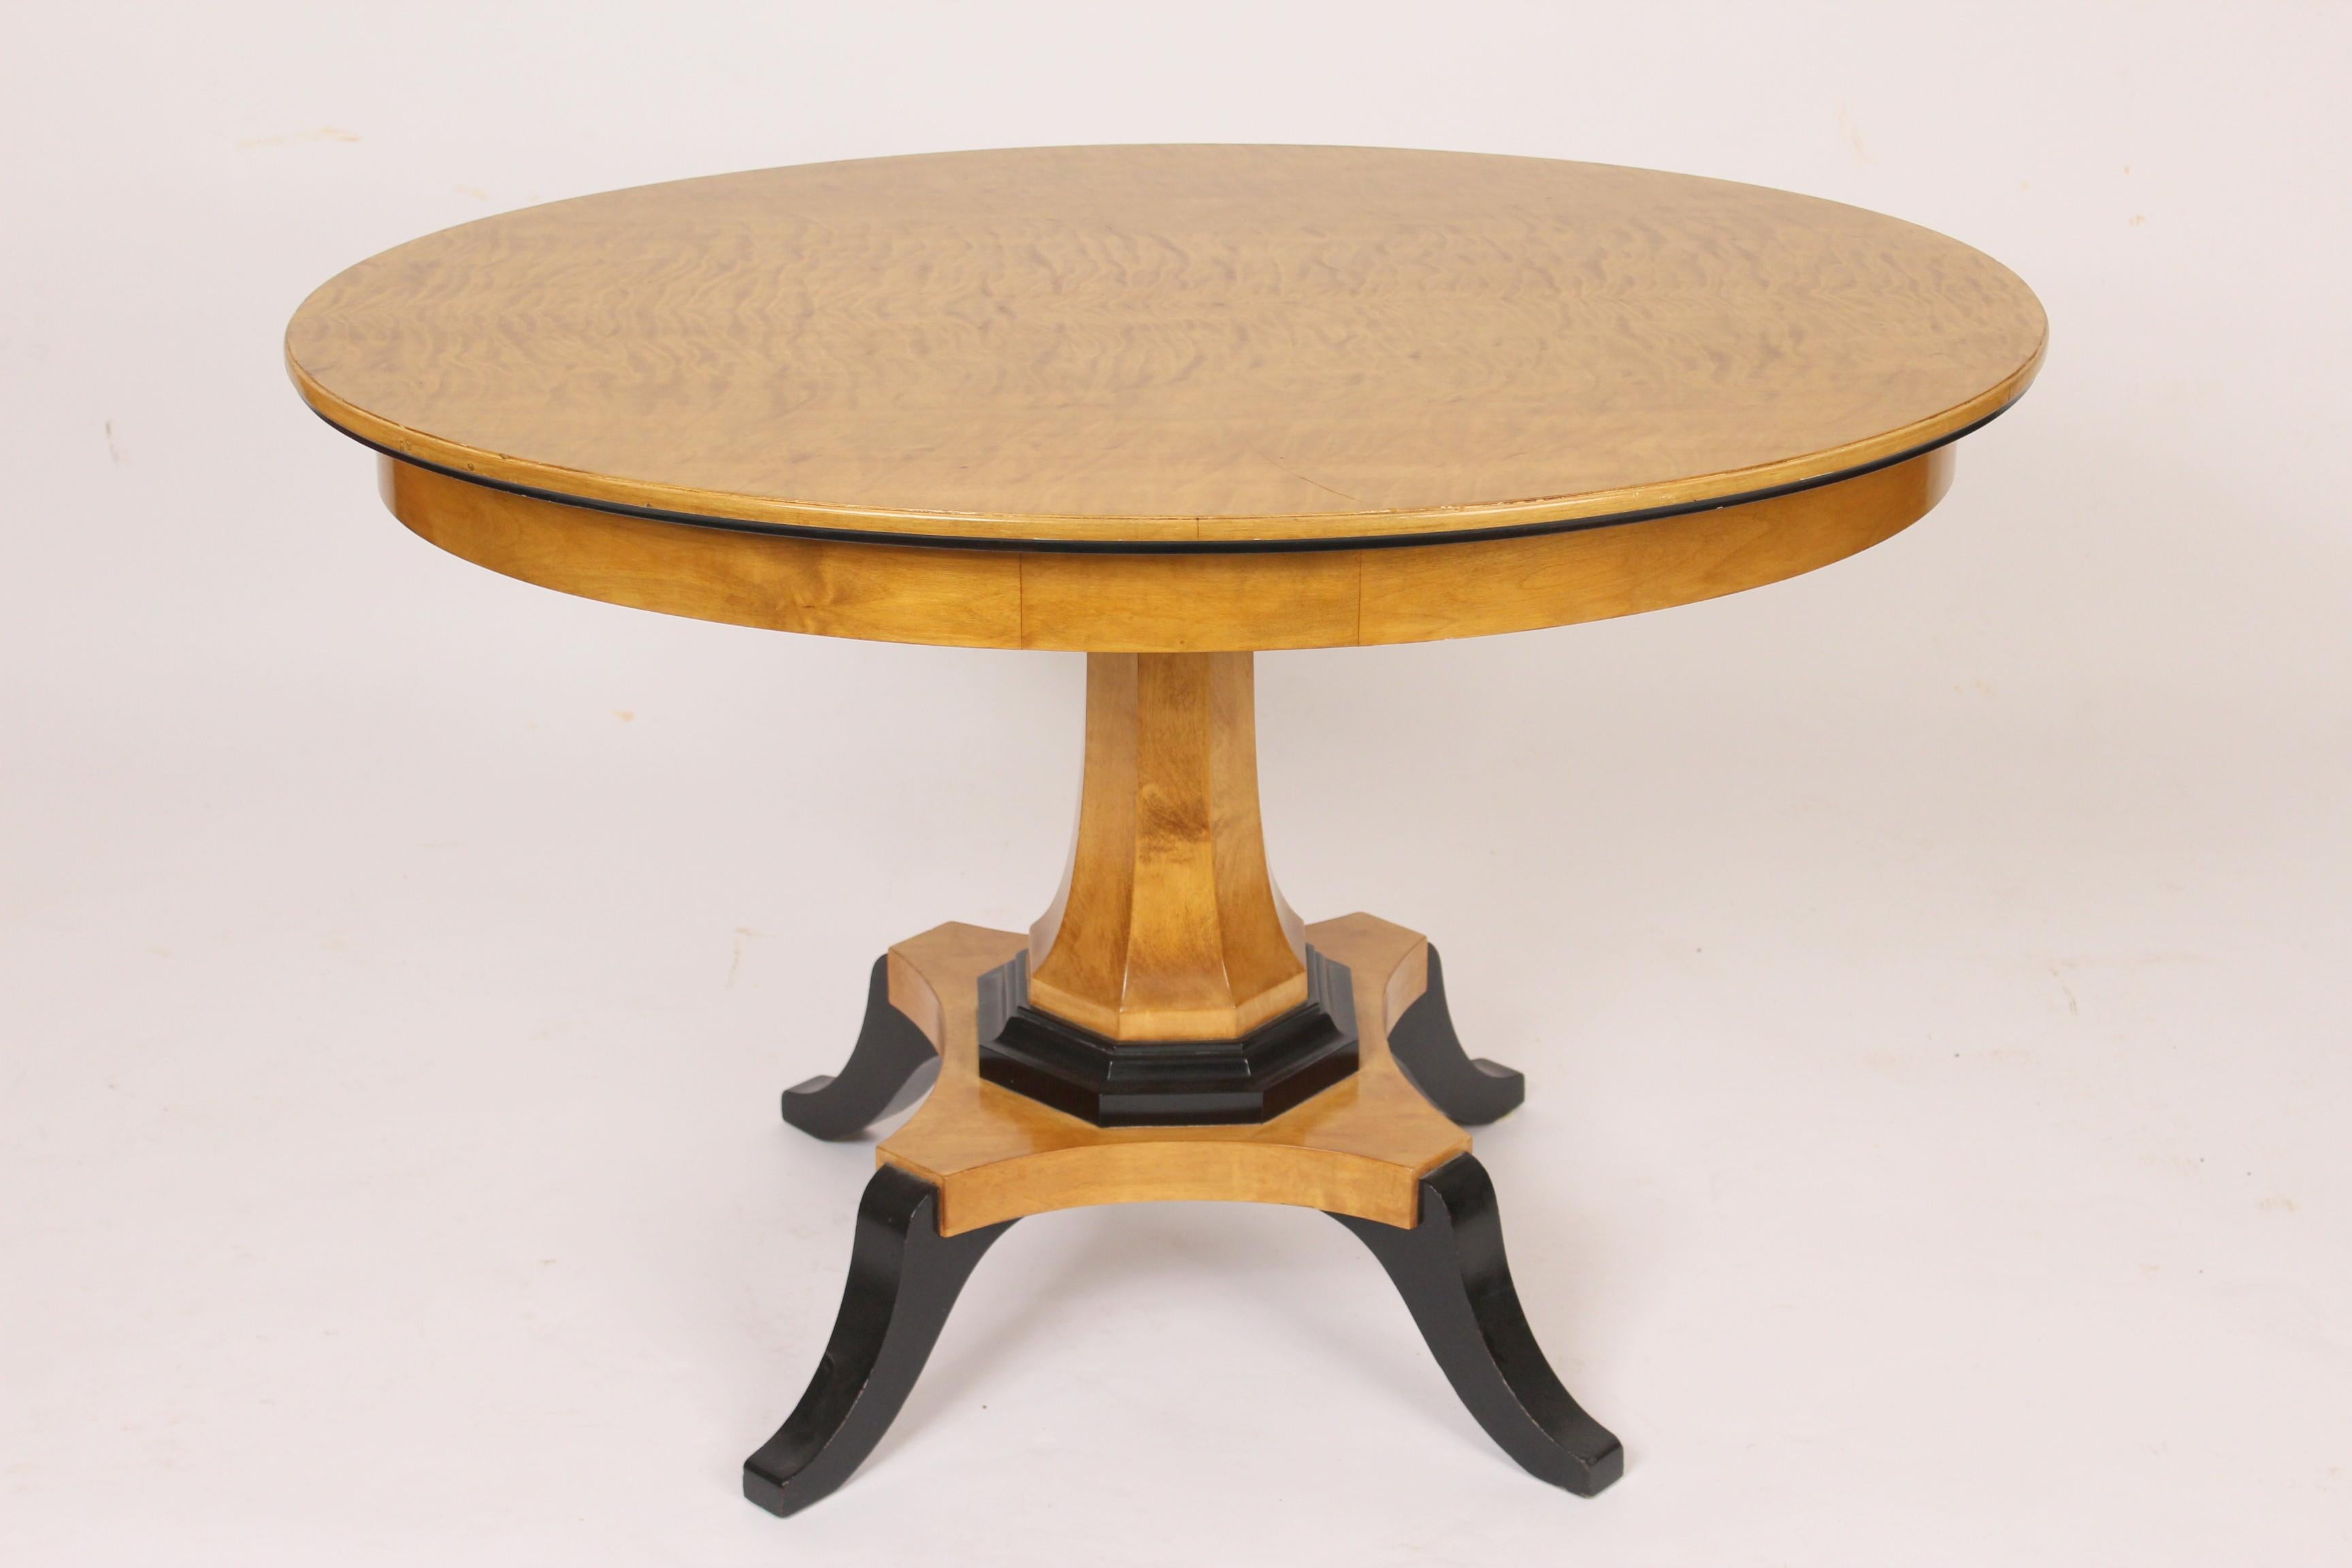 Biedermeier style oval occasional / center table, circa mid-20th century. With an oval feather birch top and ebonized feet.